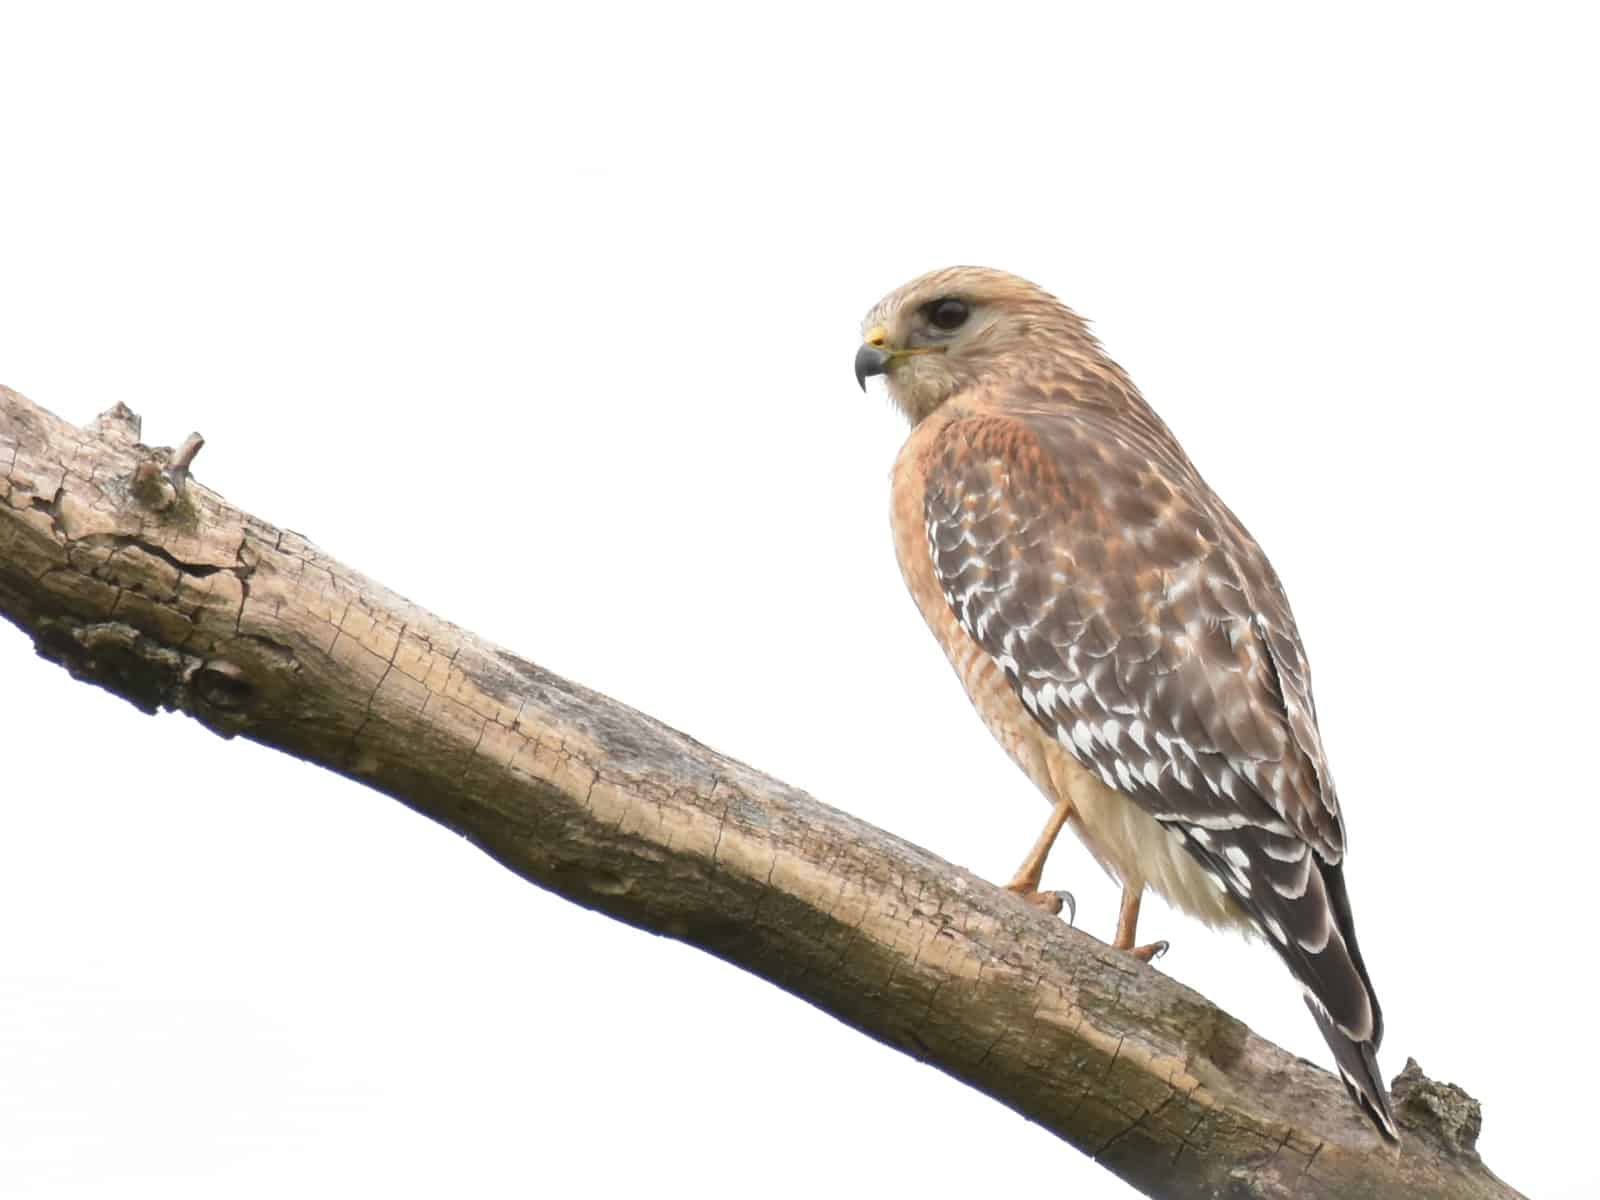 alt text: a red-shouldered hawk perched on a thick branch looking to the left.